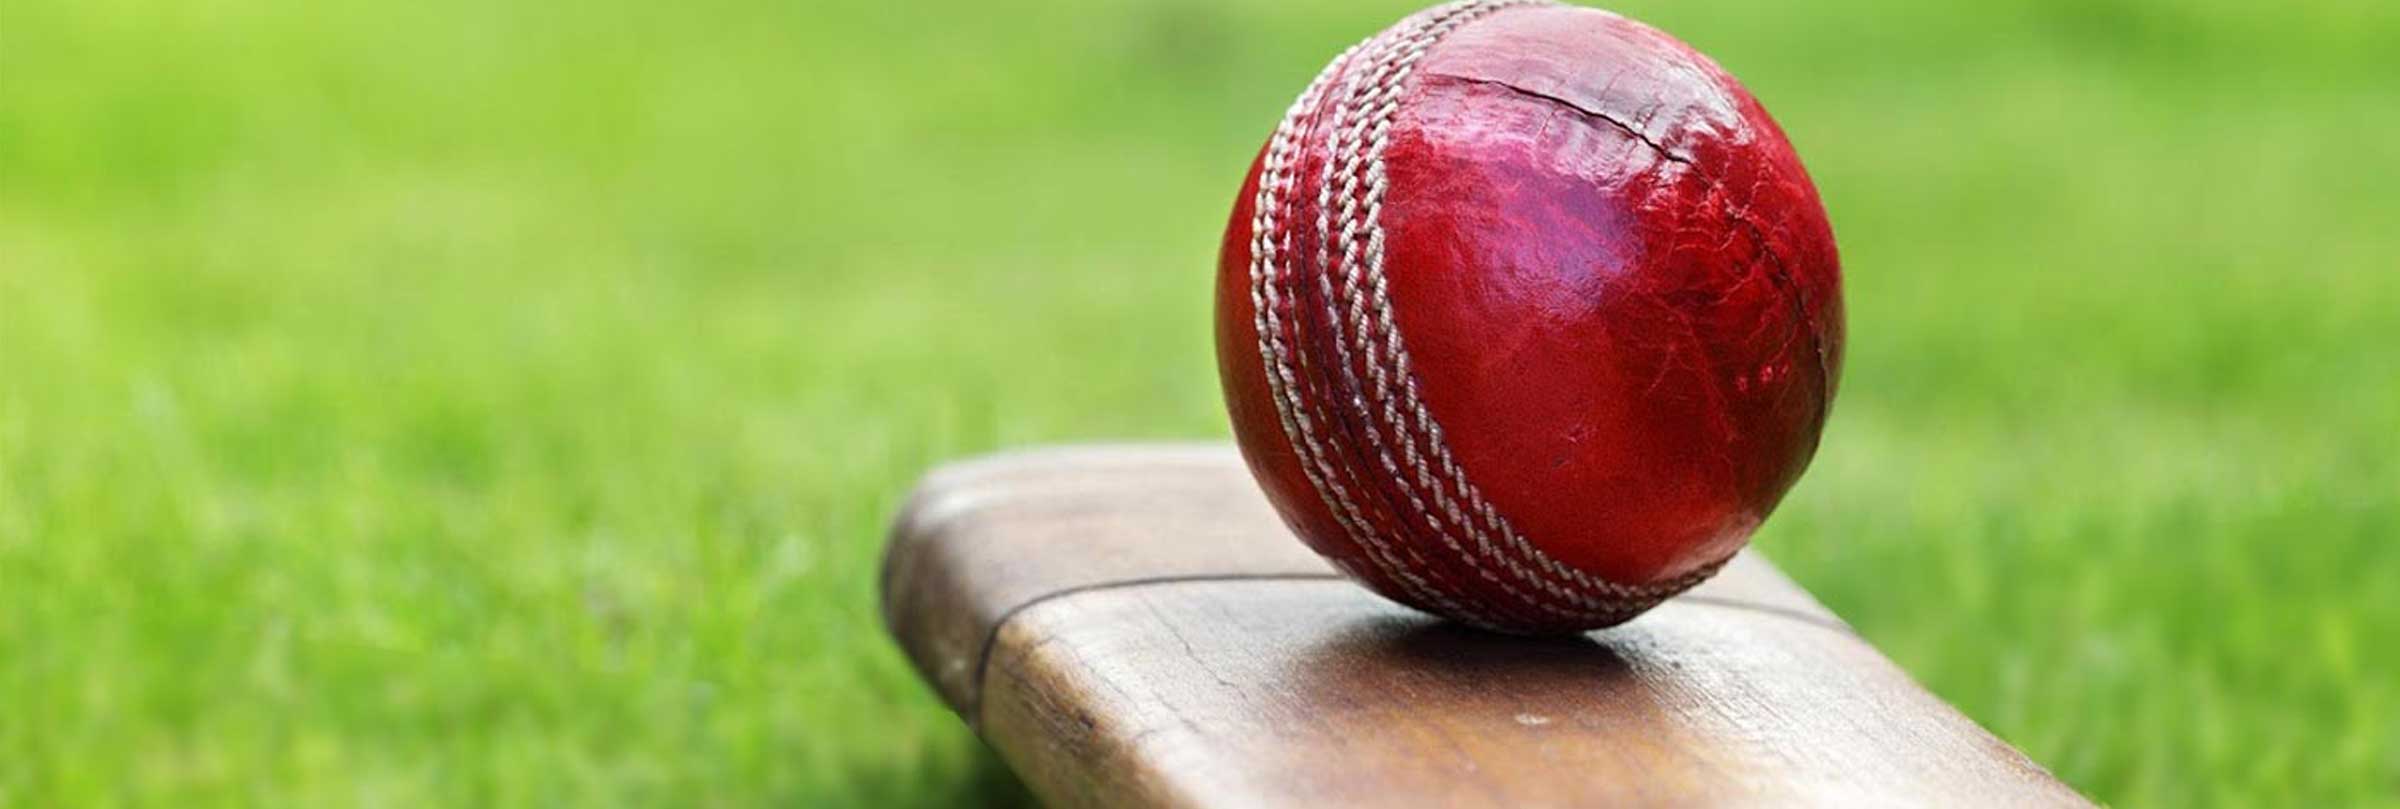 Cricket Ball and Bat on Synthetic Cricket Pitch